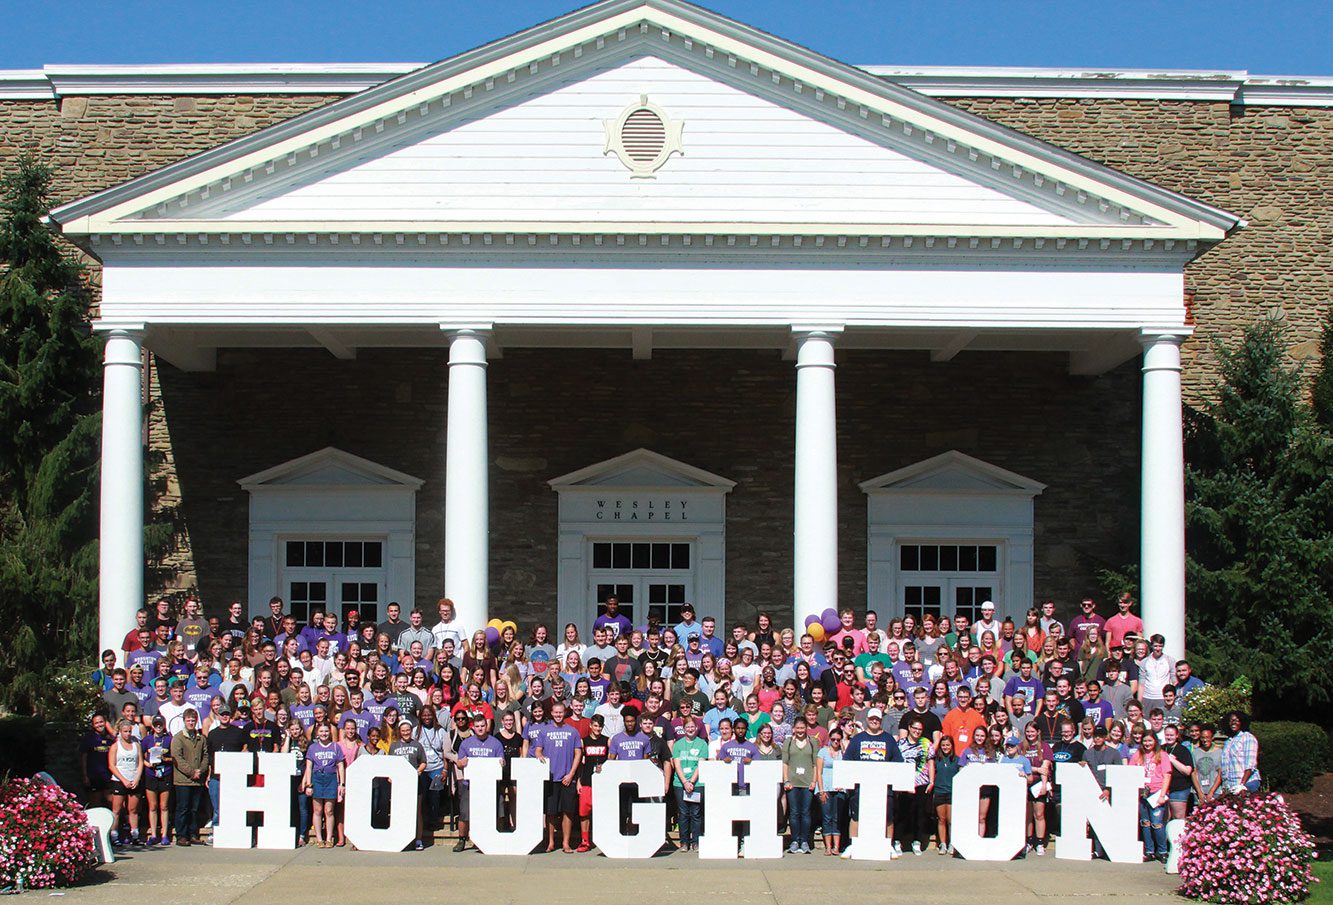 Large crowd of students posing for photo with large Houghton letters outside of chapel.